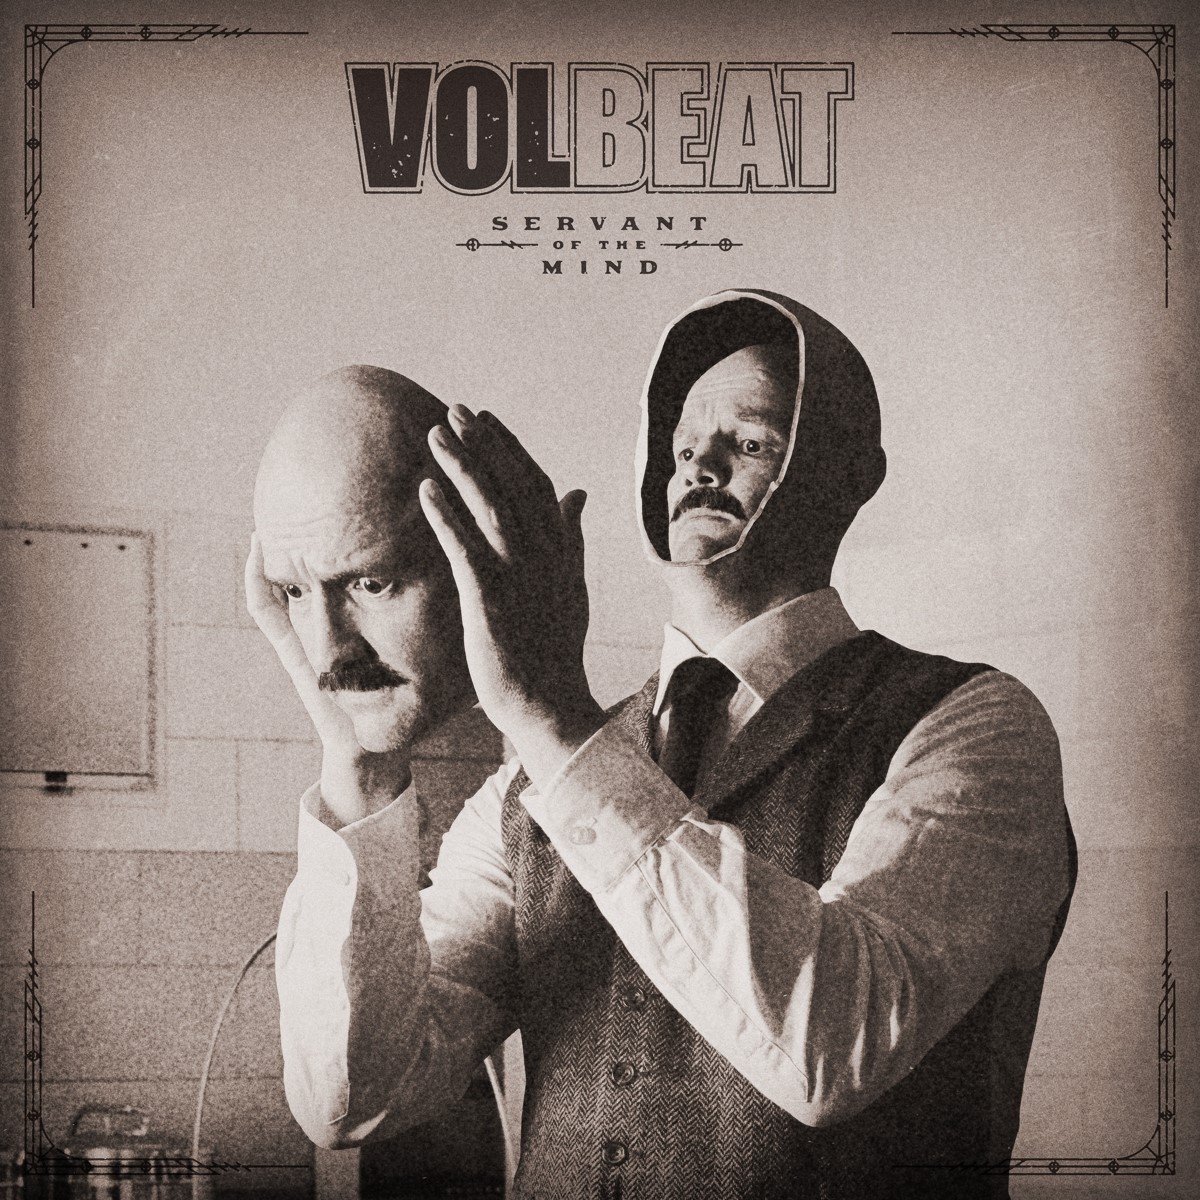 Volbeat - Servant Of The Mind (2 LP) (Coloured Vinyl) (Limited Edition) - Volbeat